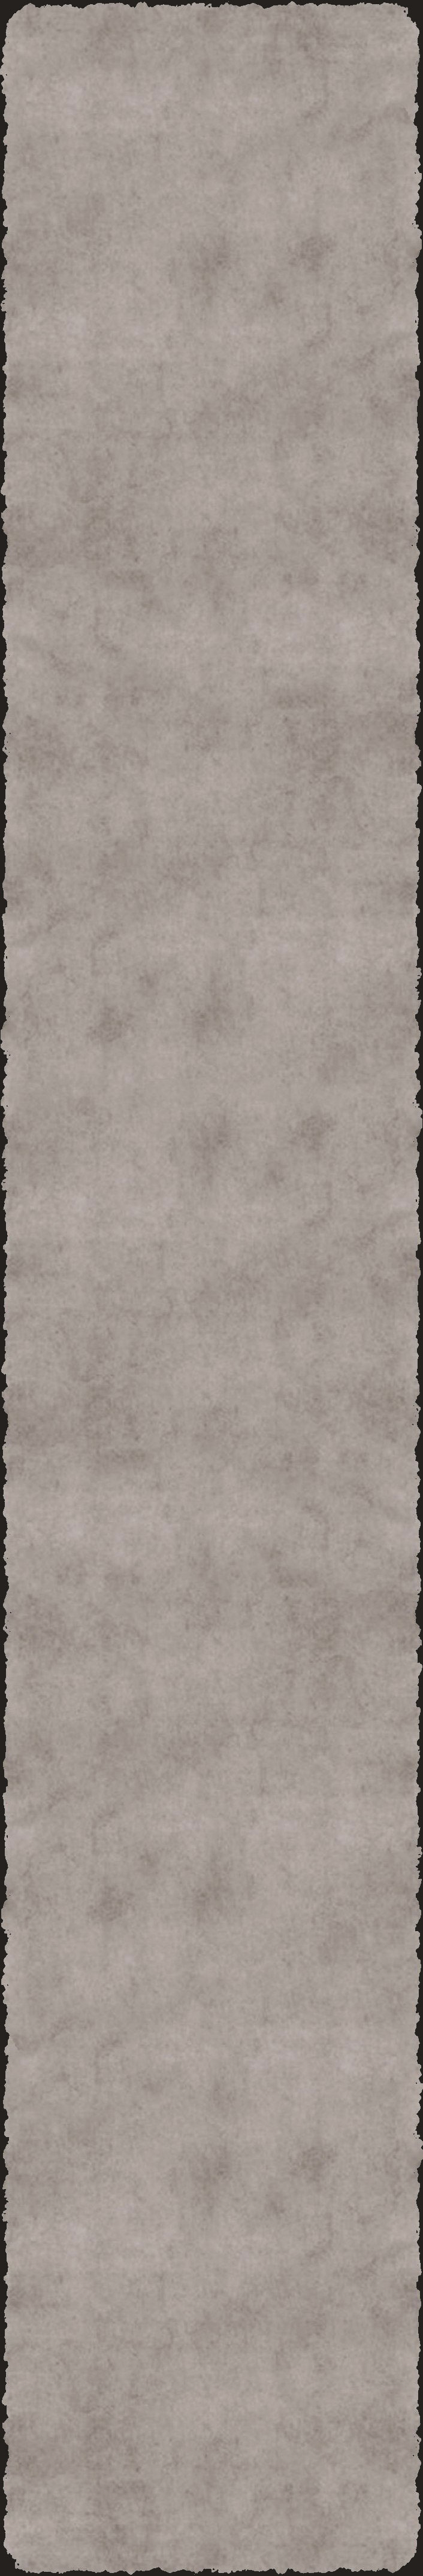 Parchment Background Image for My Projects: Screenshots, Page 1 on FlightToAtlantis.net